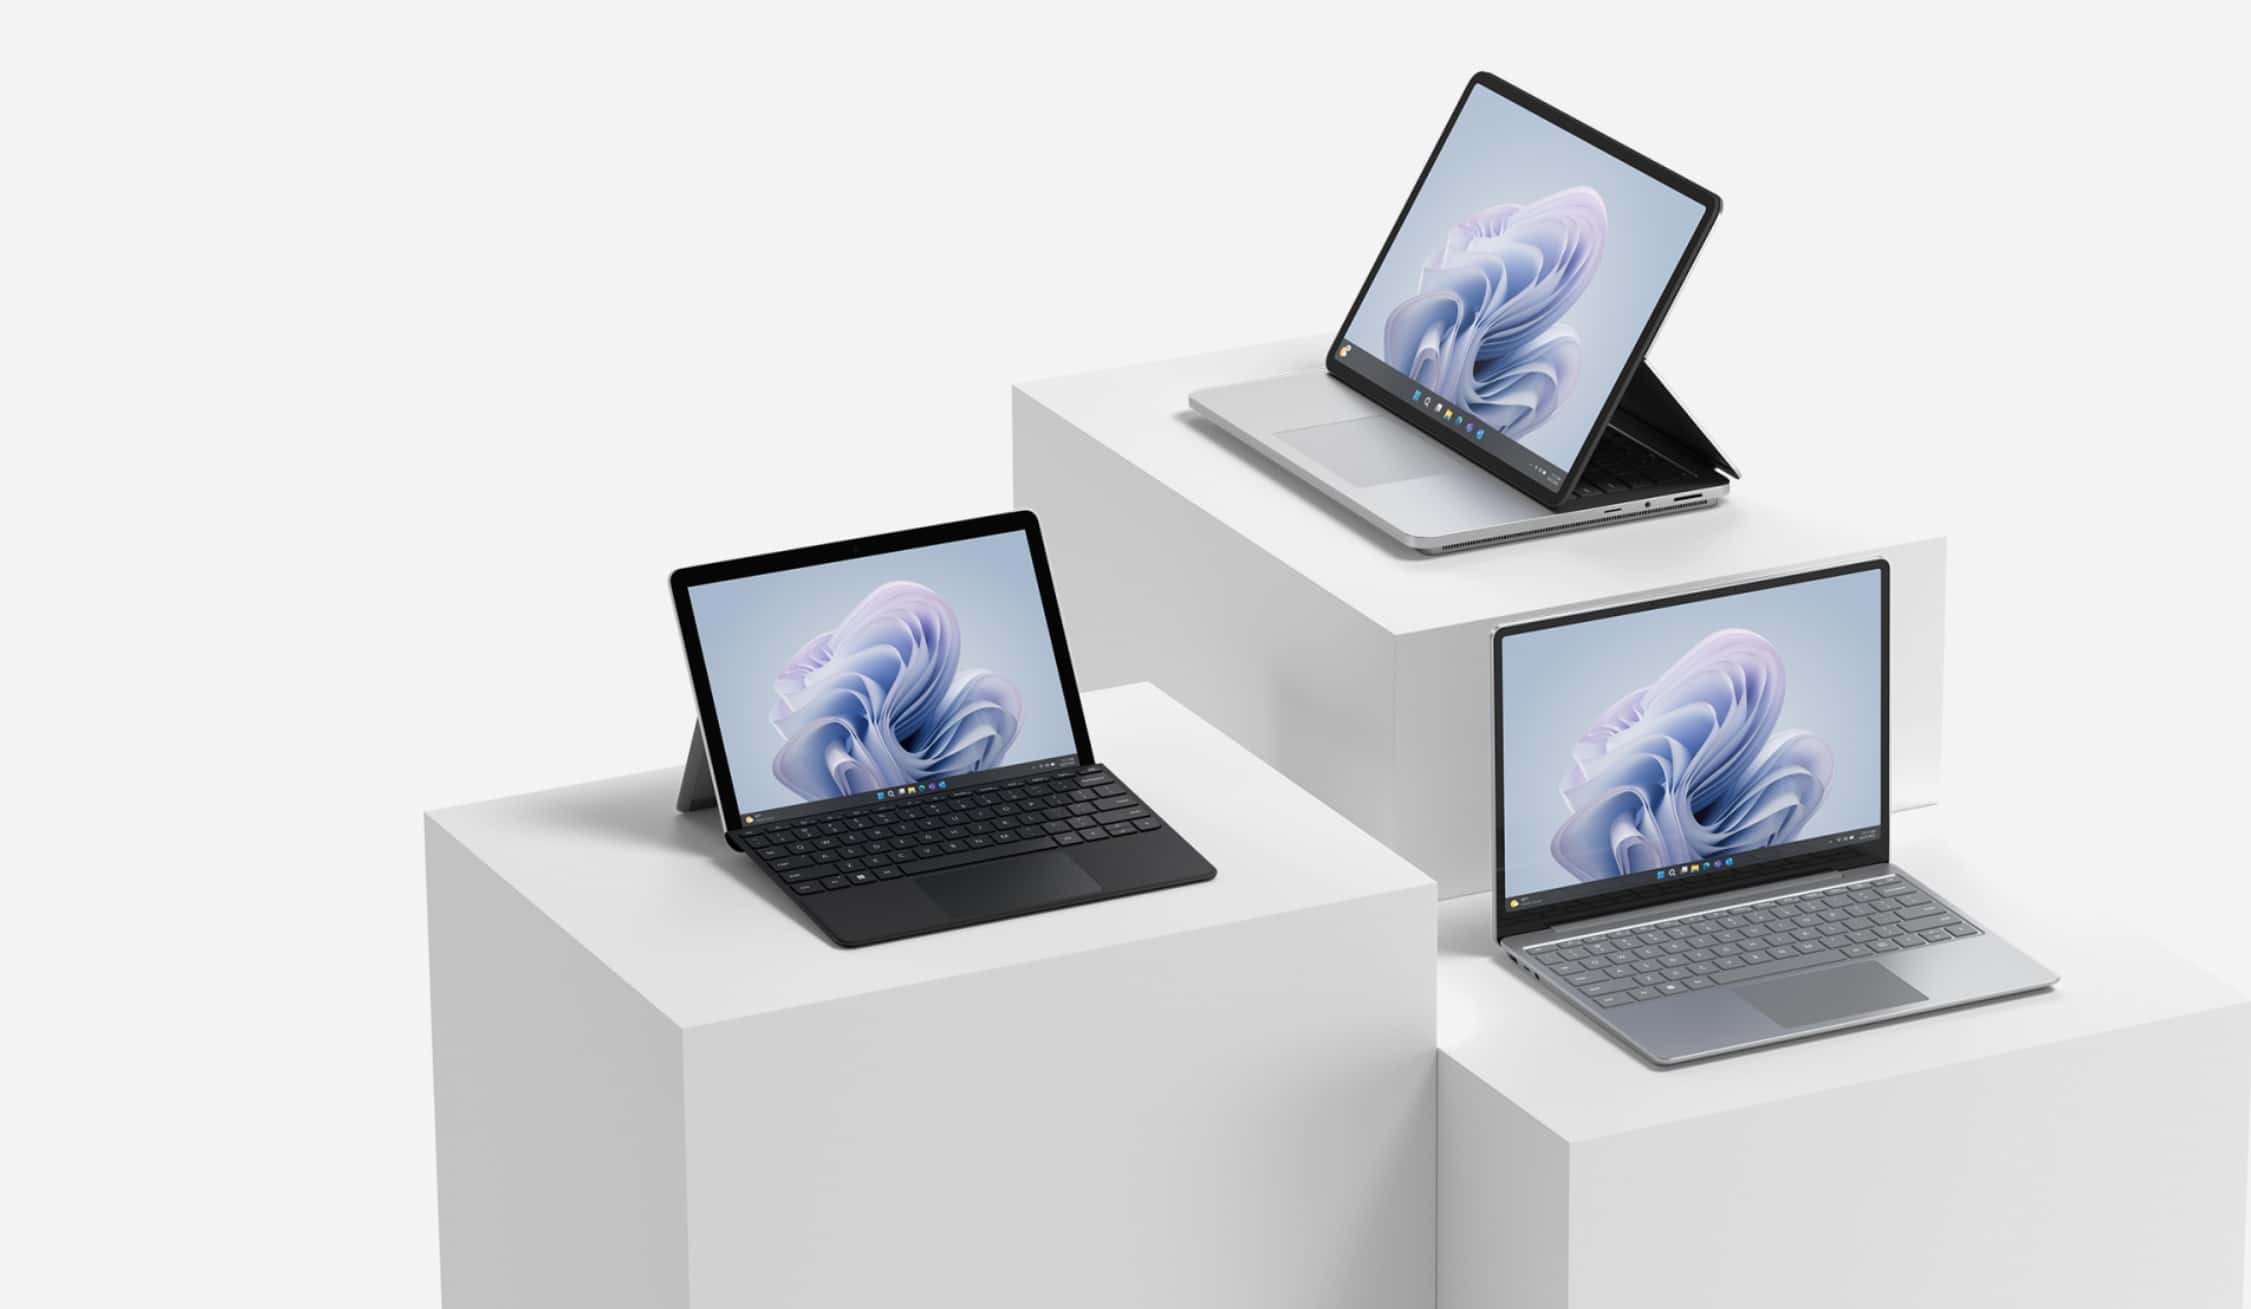 Microsoft promises to deliver six years of driver and firmware updates for Surface devices